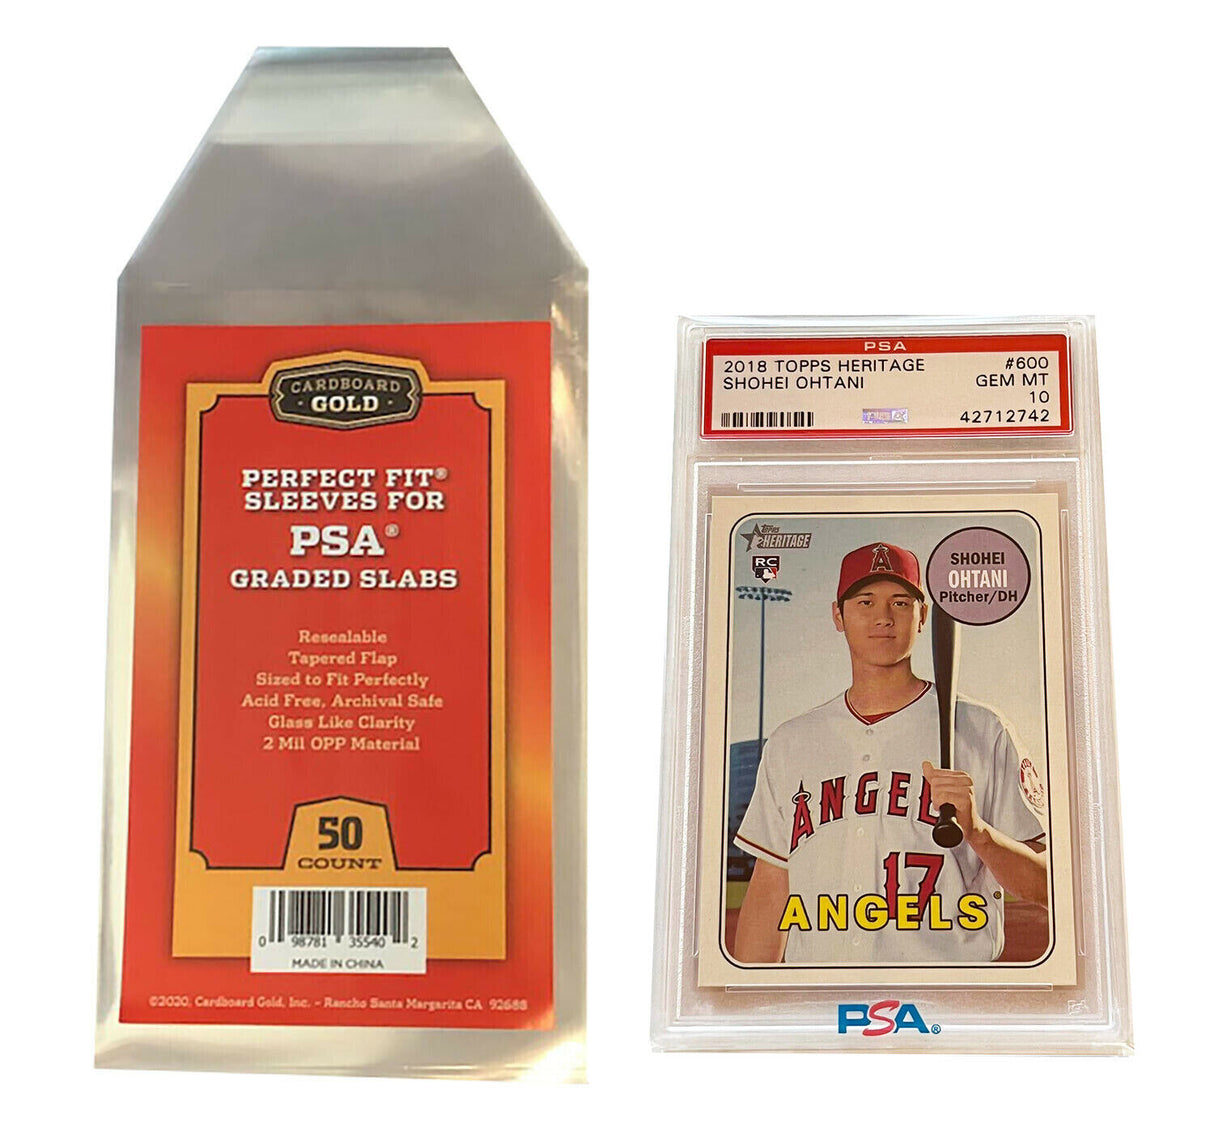 500ct Perfect Fit Graded Cards Sleeves PSA Logo - Cardboard Gold